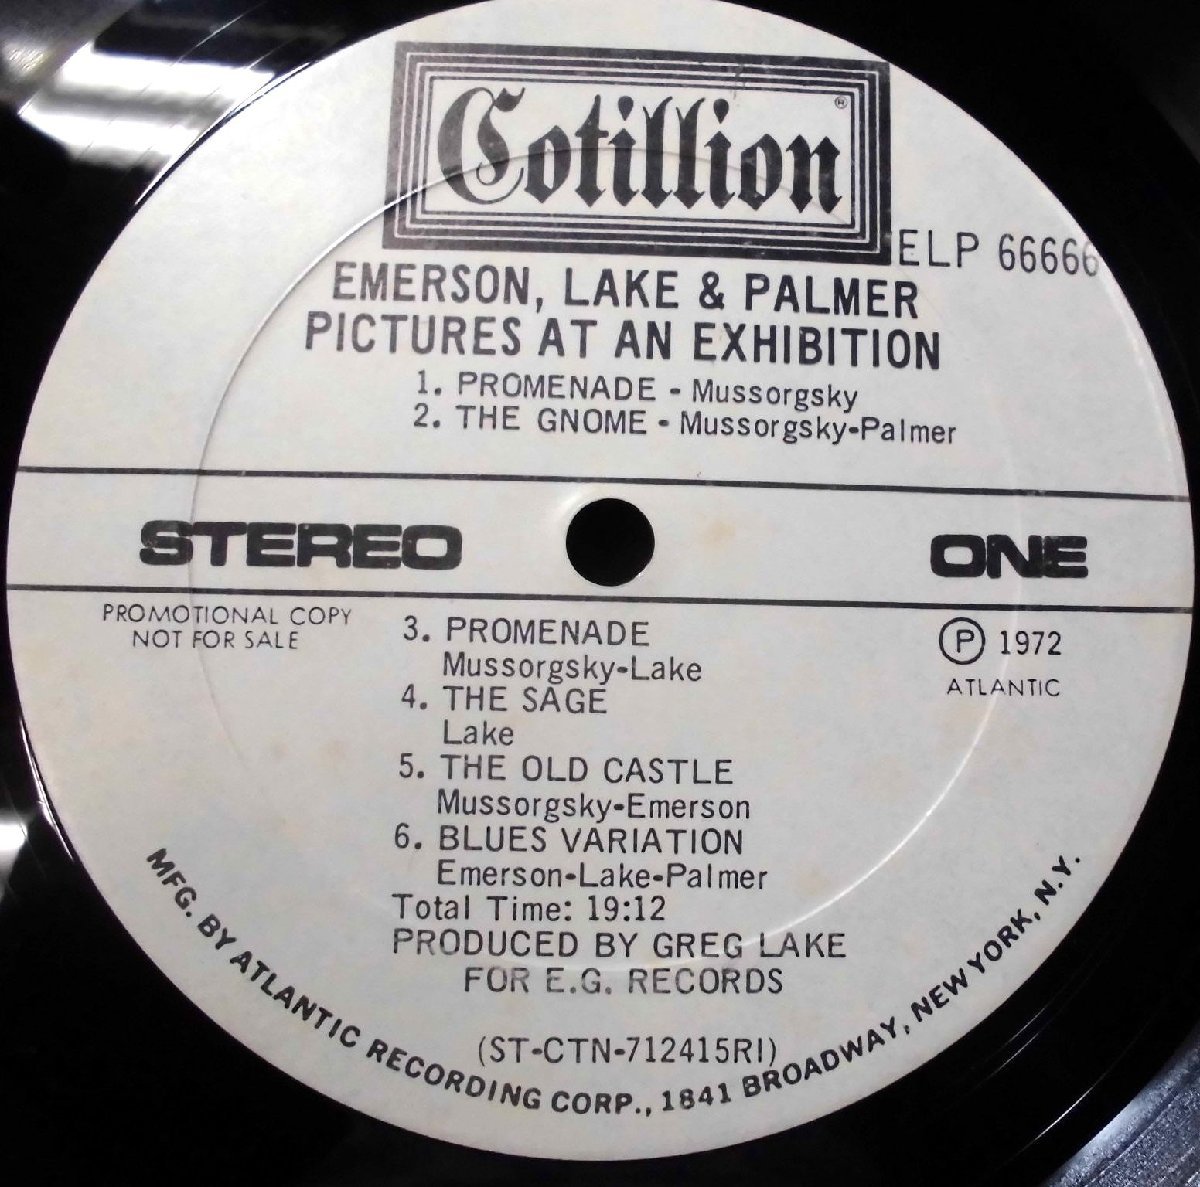 ●US-Cotillionオリジナル””Promo Copy White Labels,RI-Pressing!!”” Emerson, Lake & Palmer,ELP / Pictures At An Exhibition_画像8